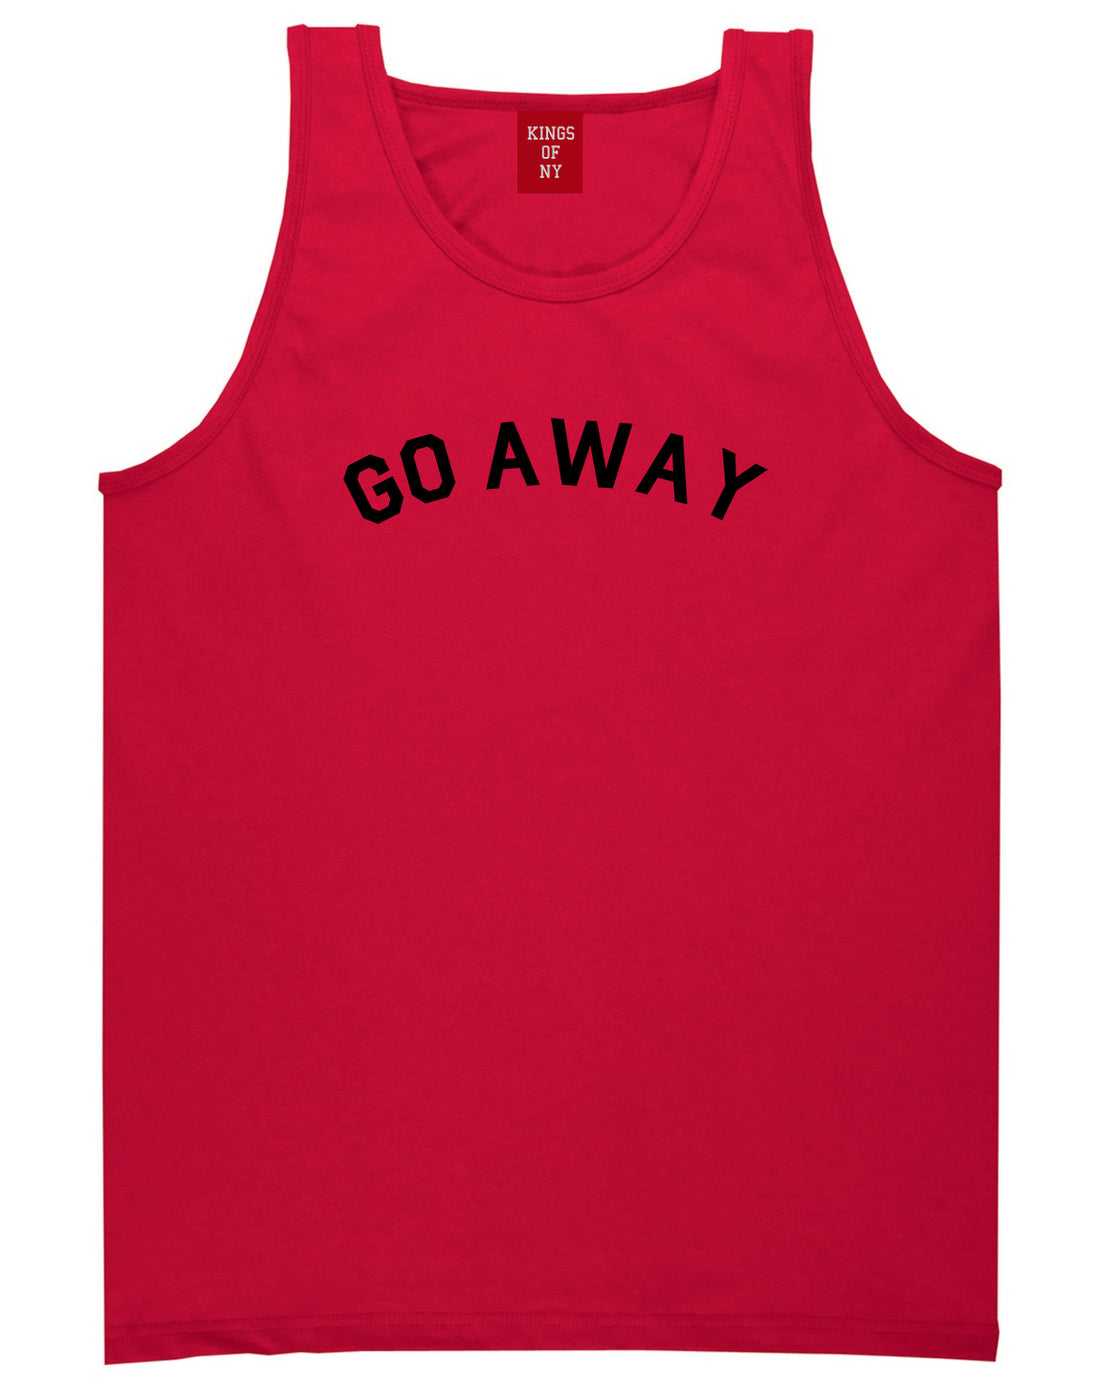 Go Away Mens Red Tank Top Shirt by KINGS OF NY